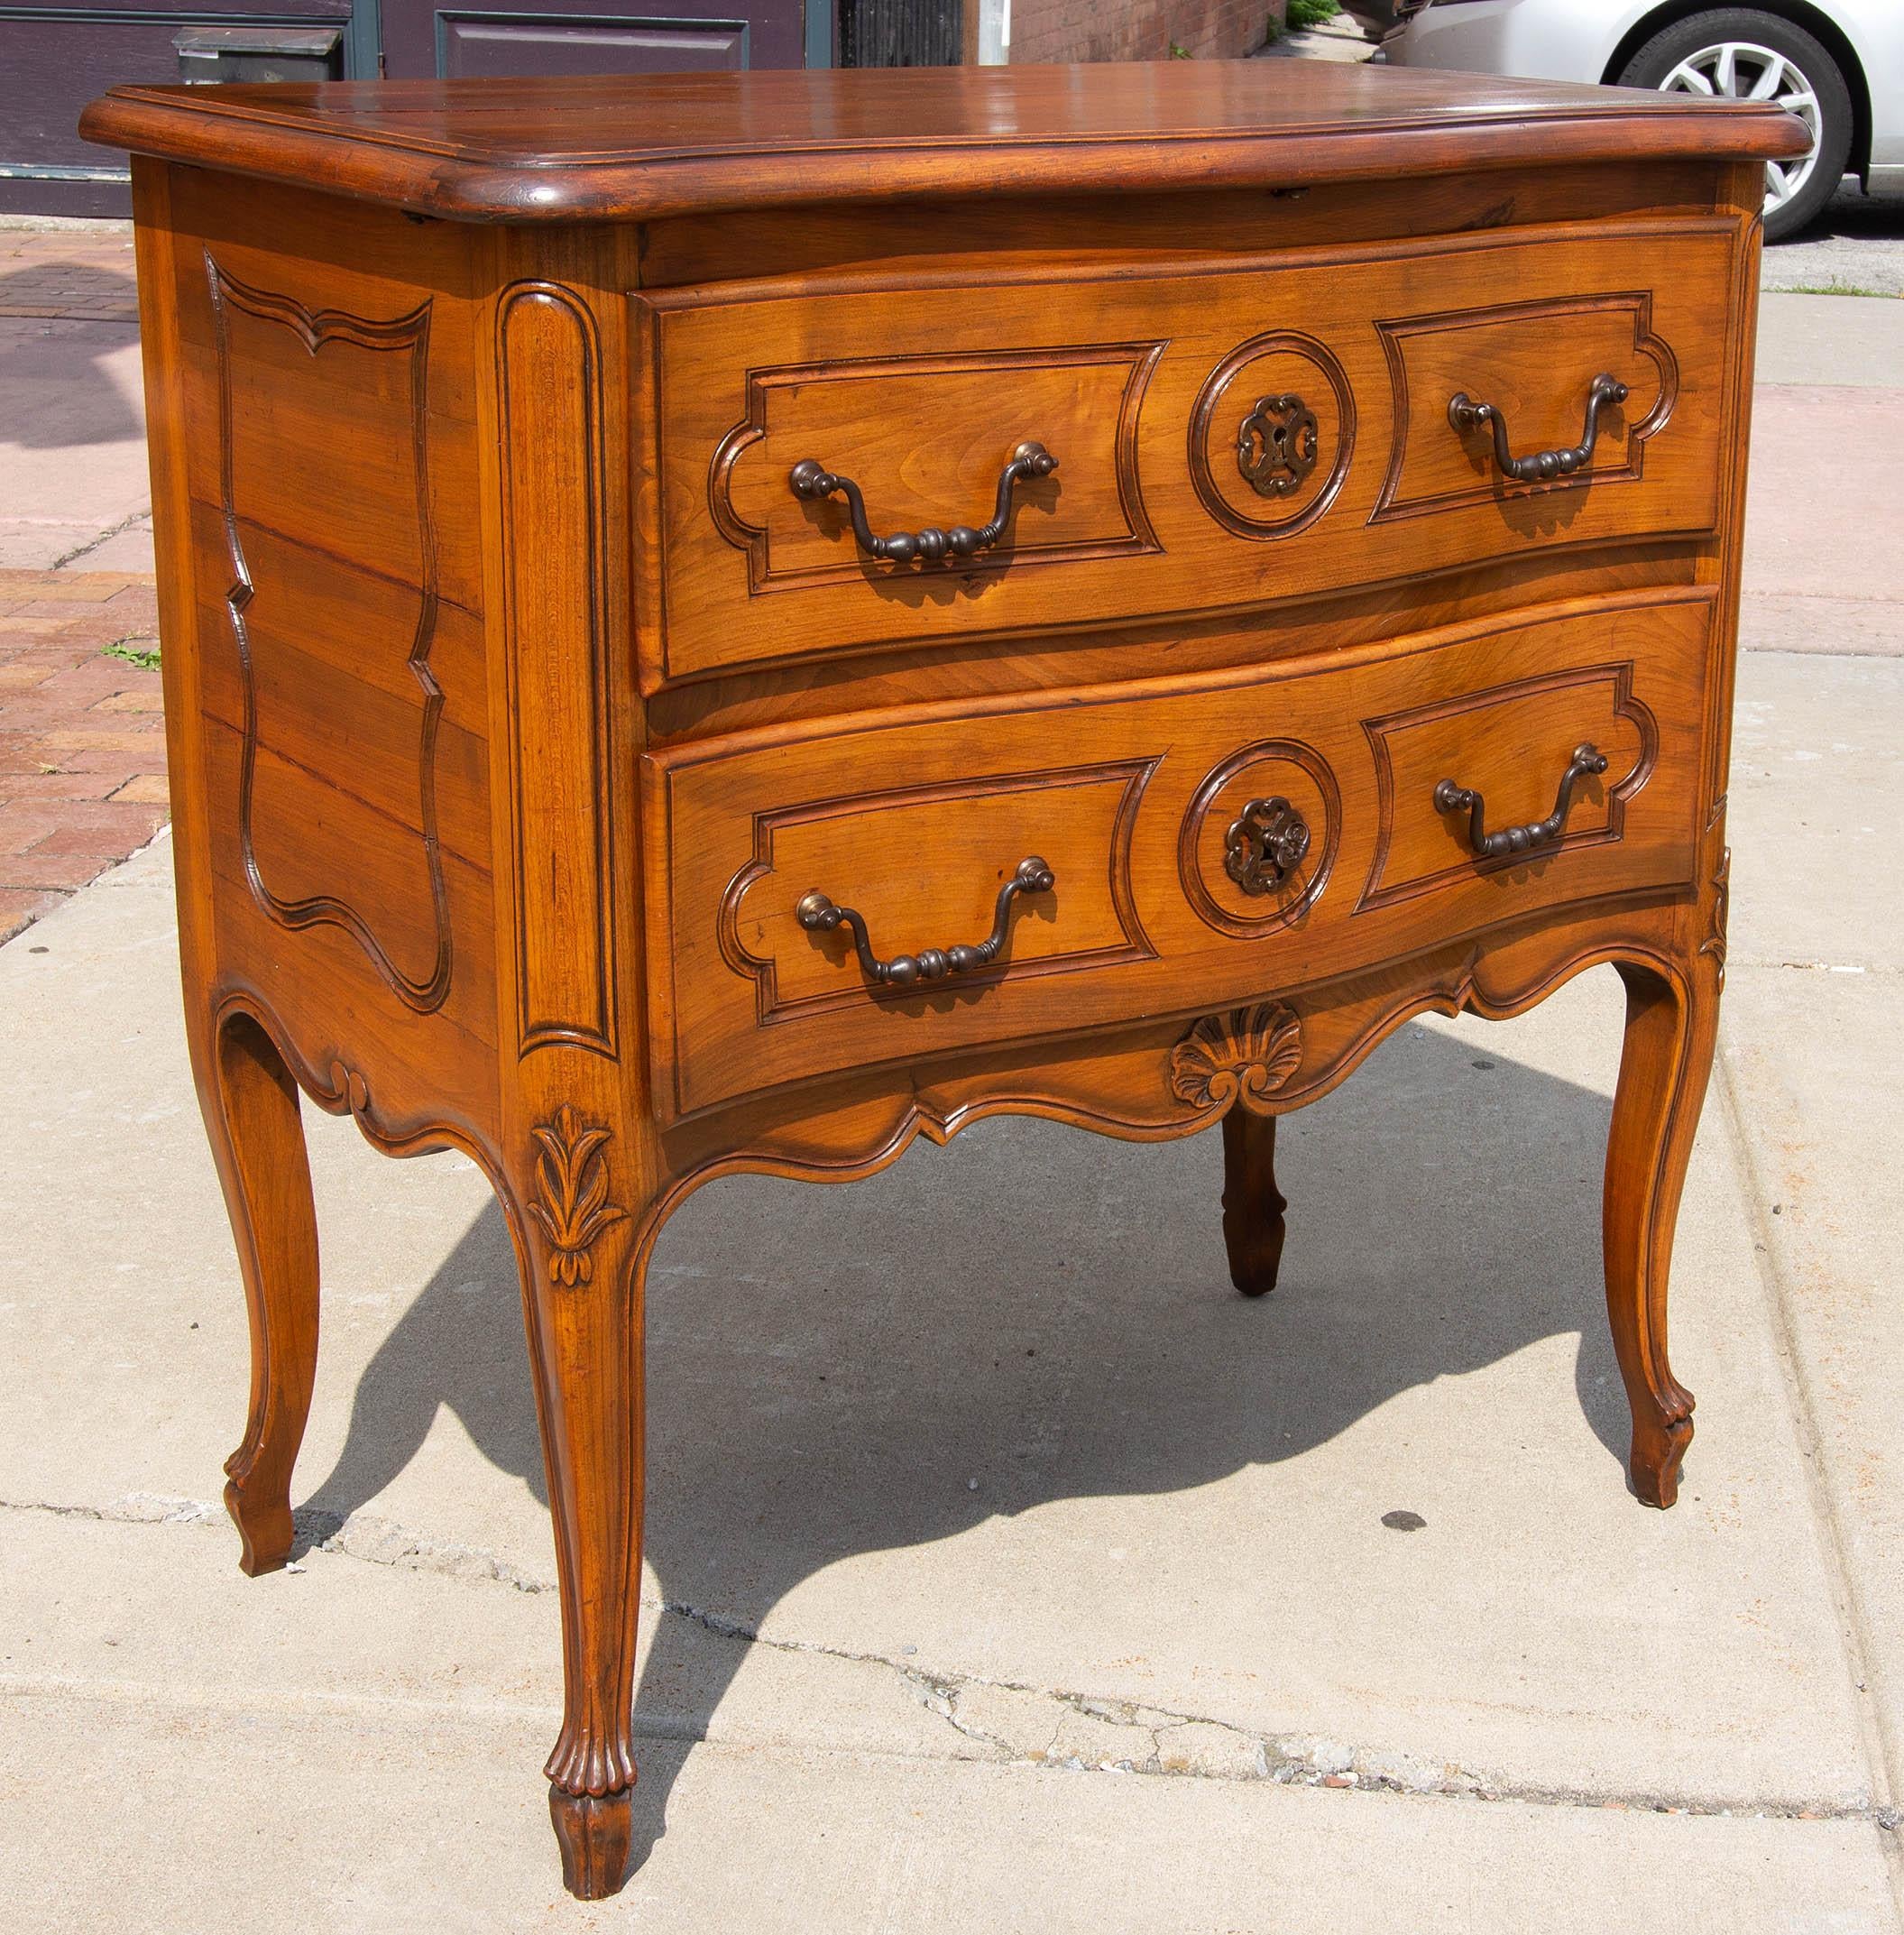 French Provincial carved solid cherry commode. Hand cut dovetail construction. Brass hardware. Locking drawers with key.
     